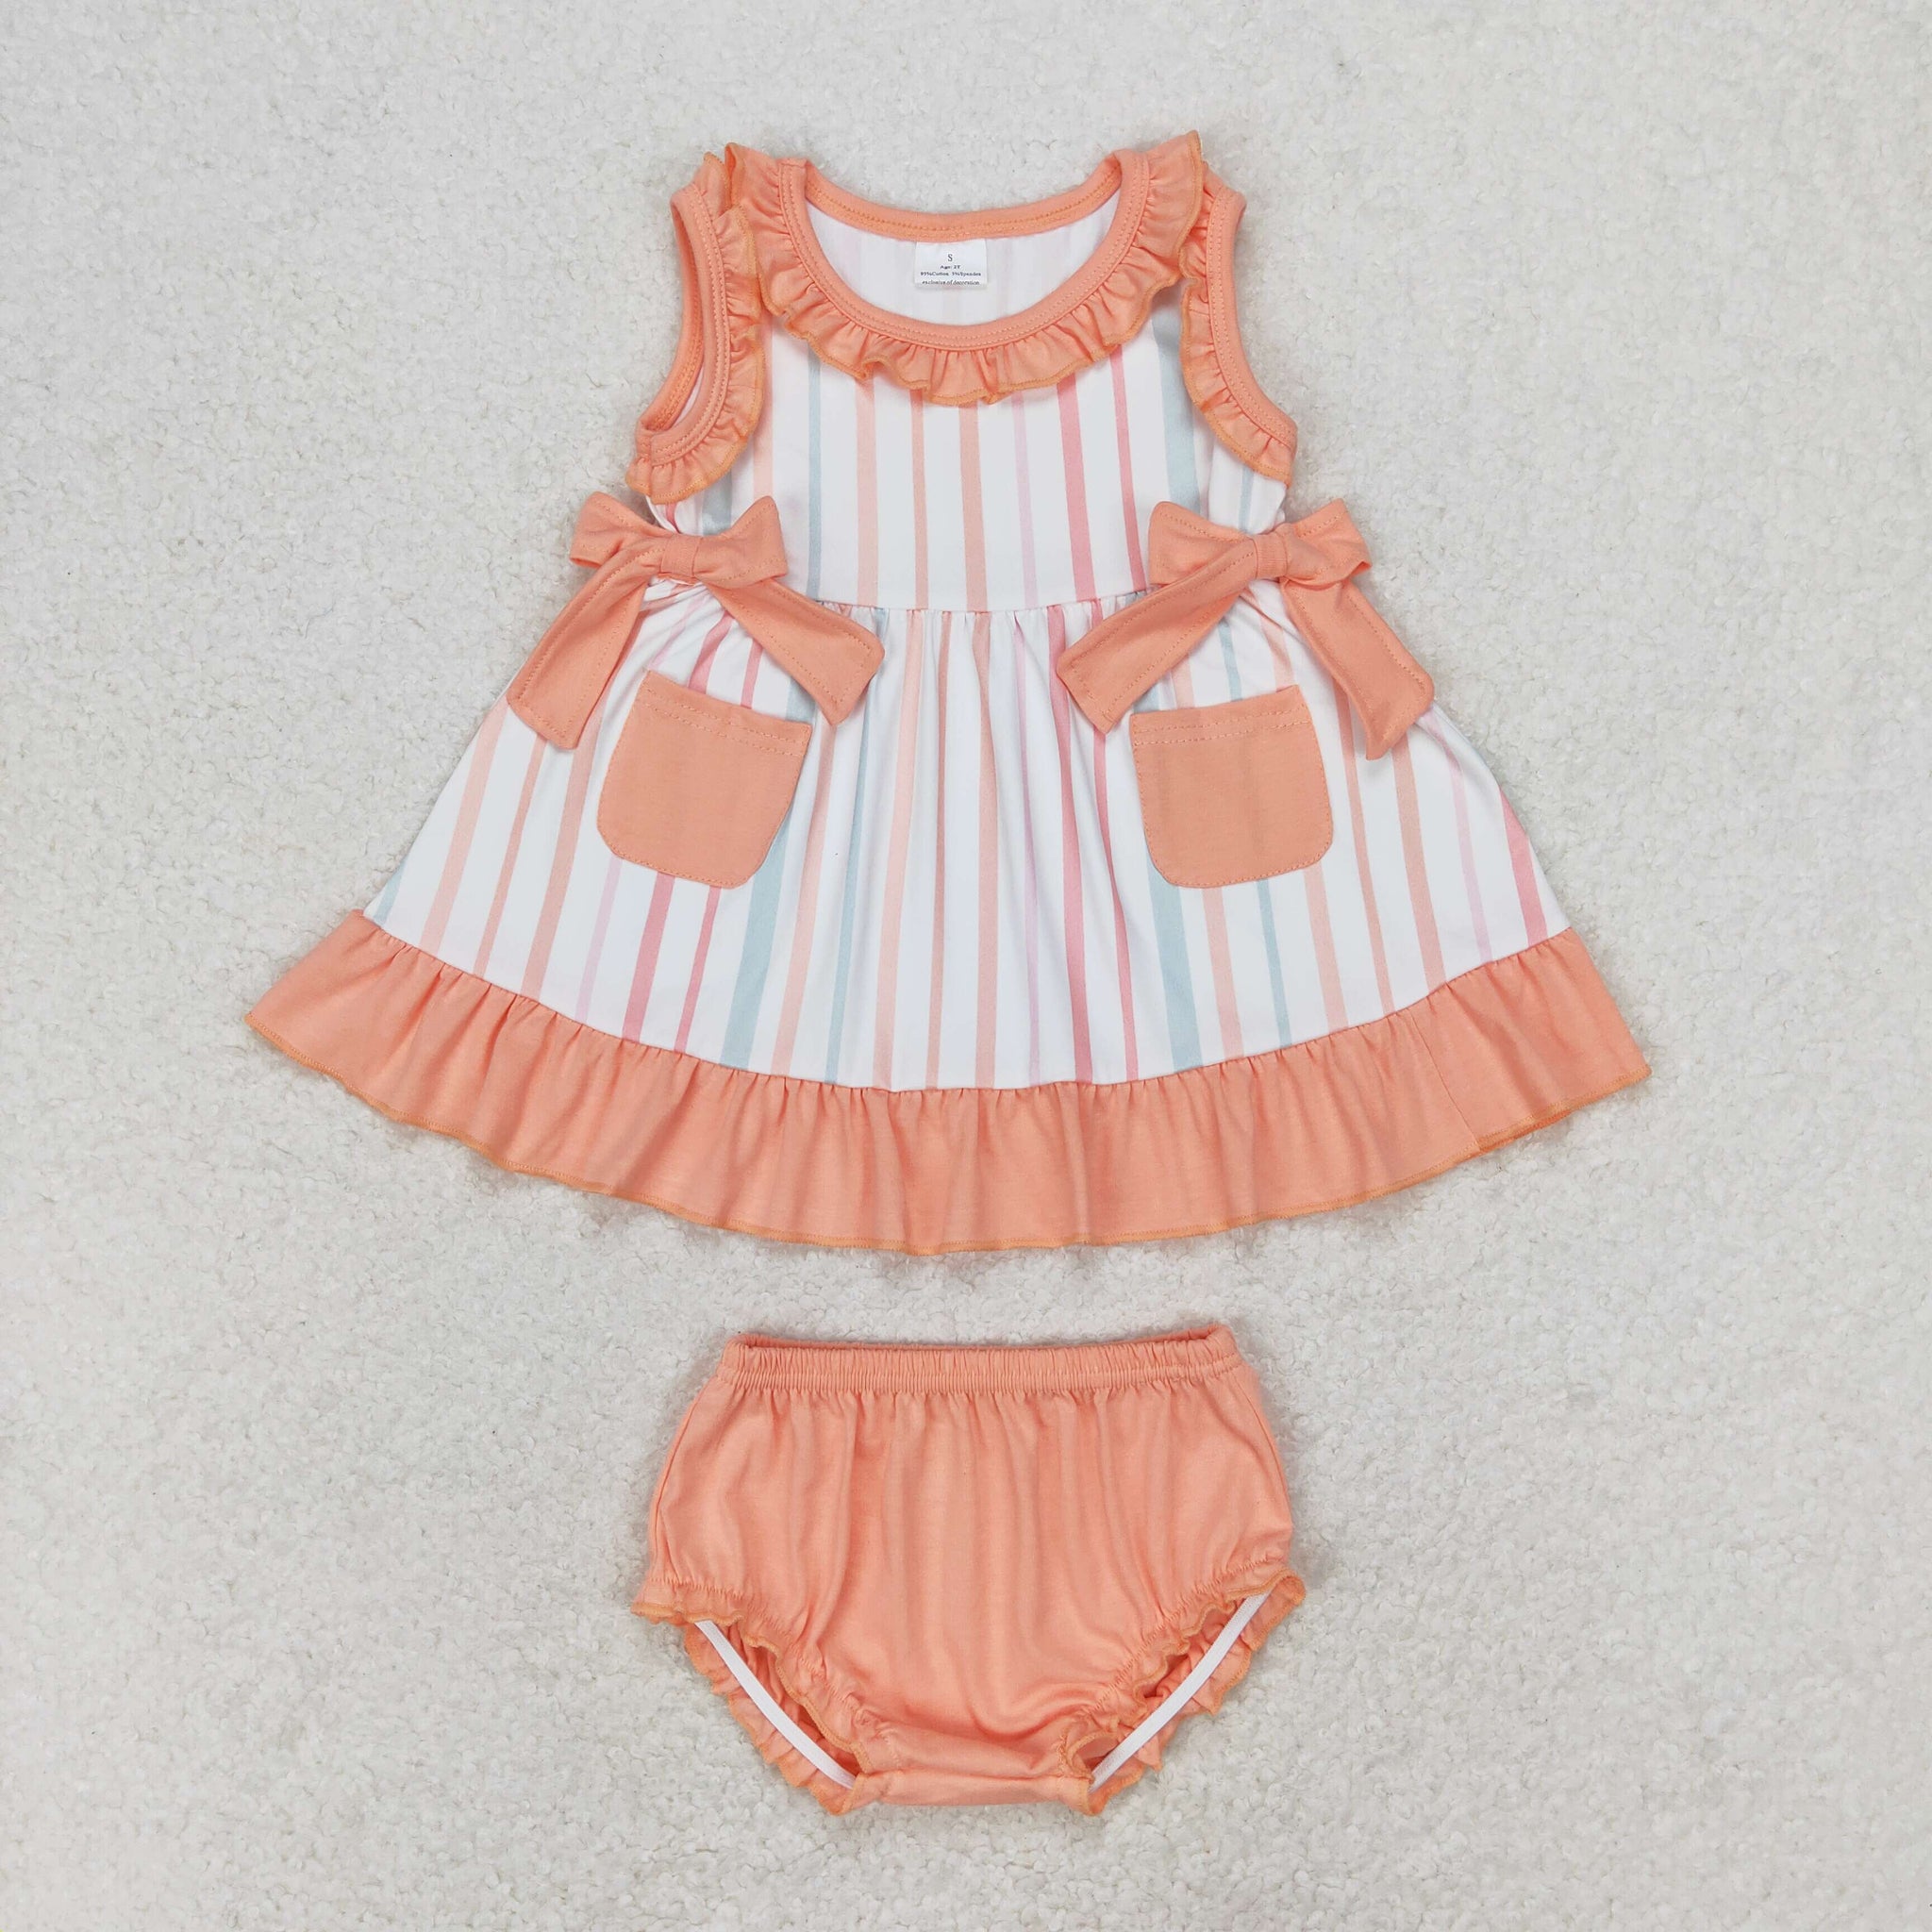 GBO0293 RTS baby girl clothes orange floral toddler girl summer bummies set